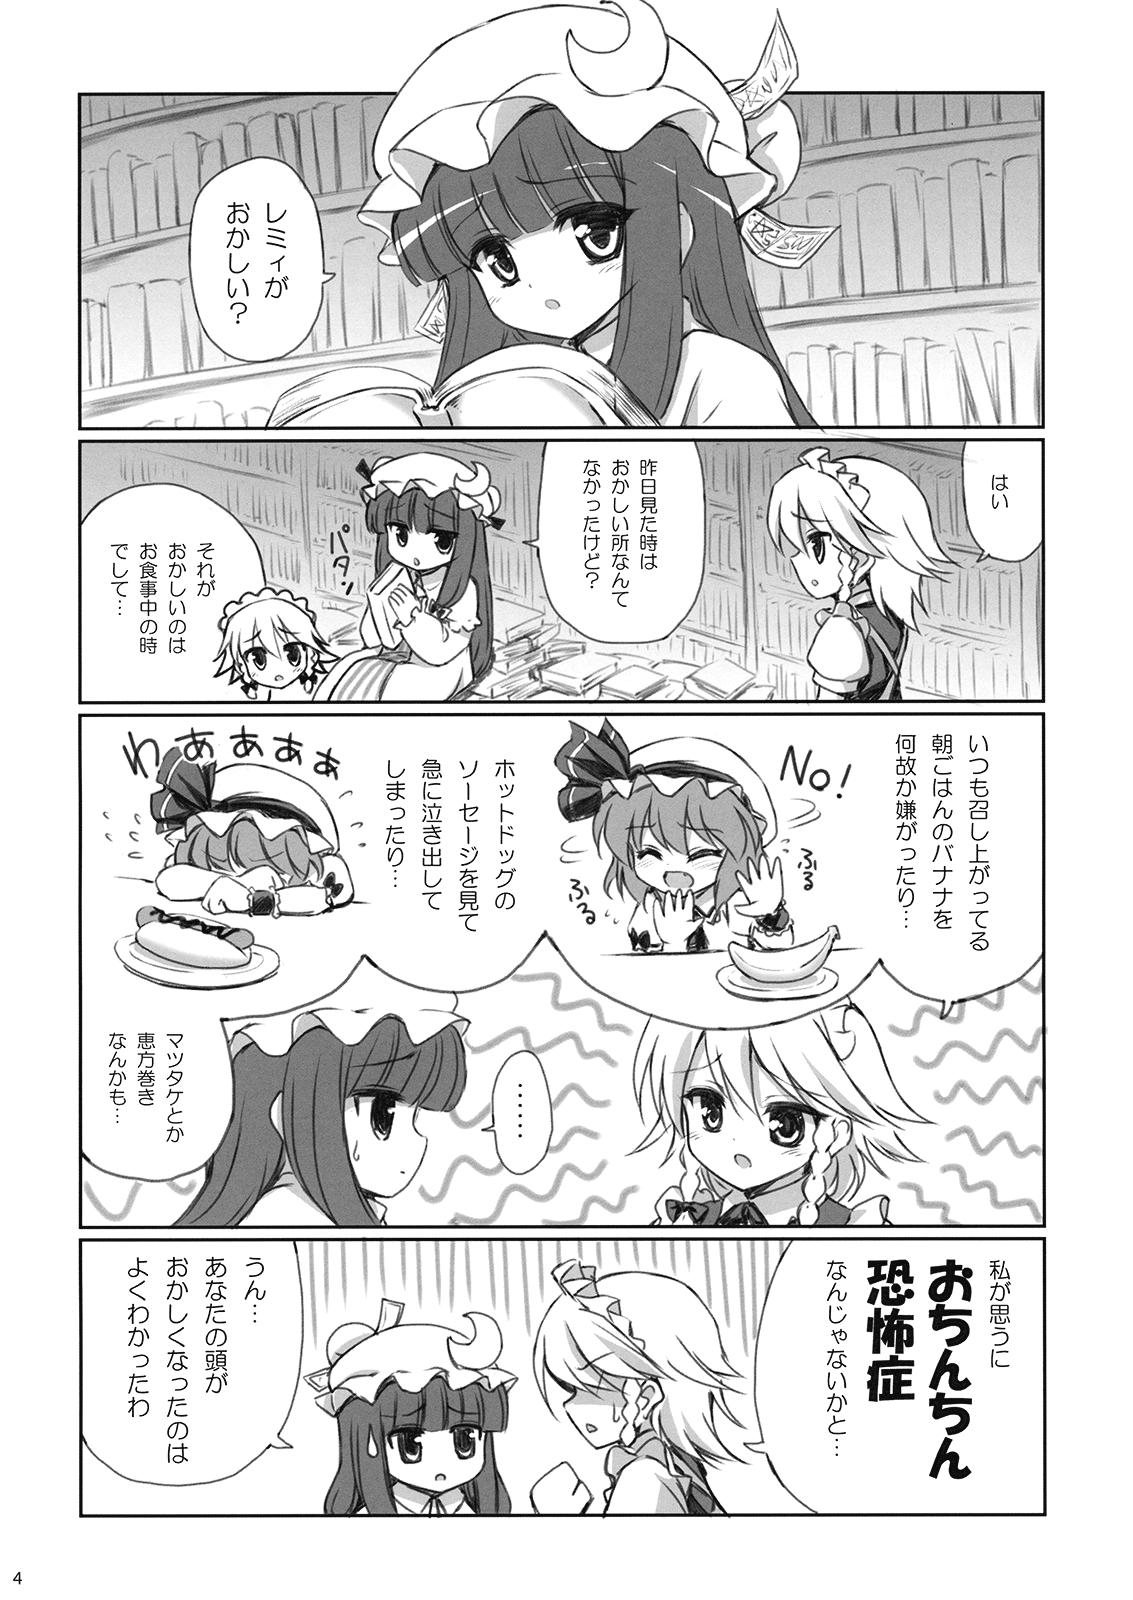 Oral Porn CHILD DRAGON - Touhou project China - Page 4